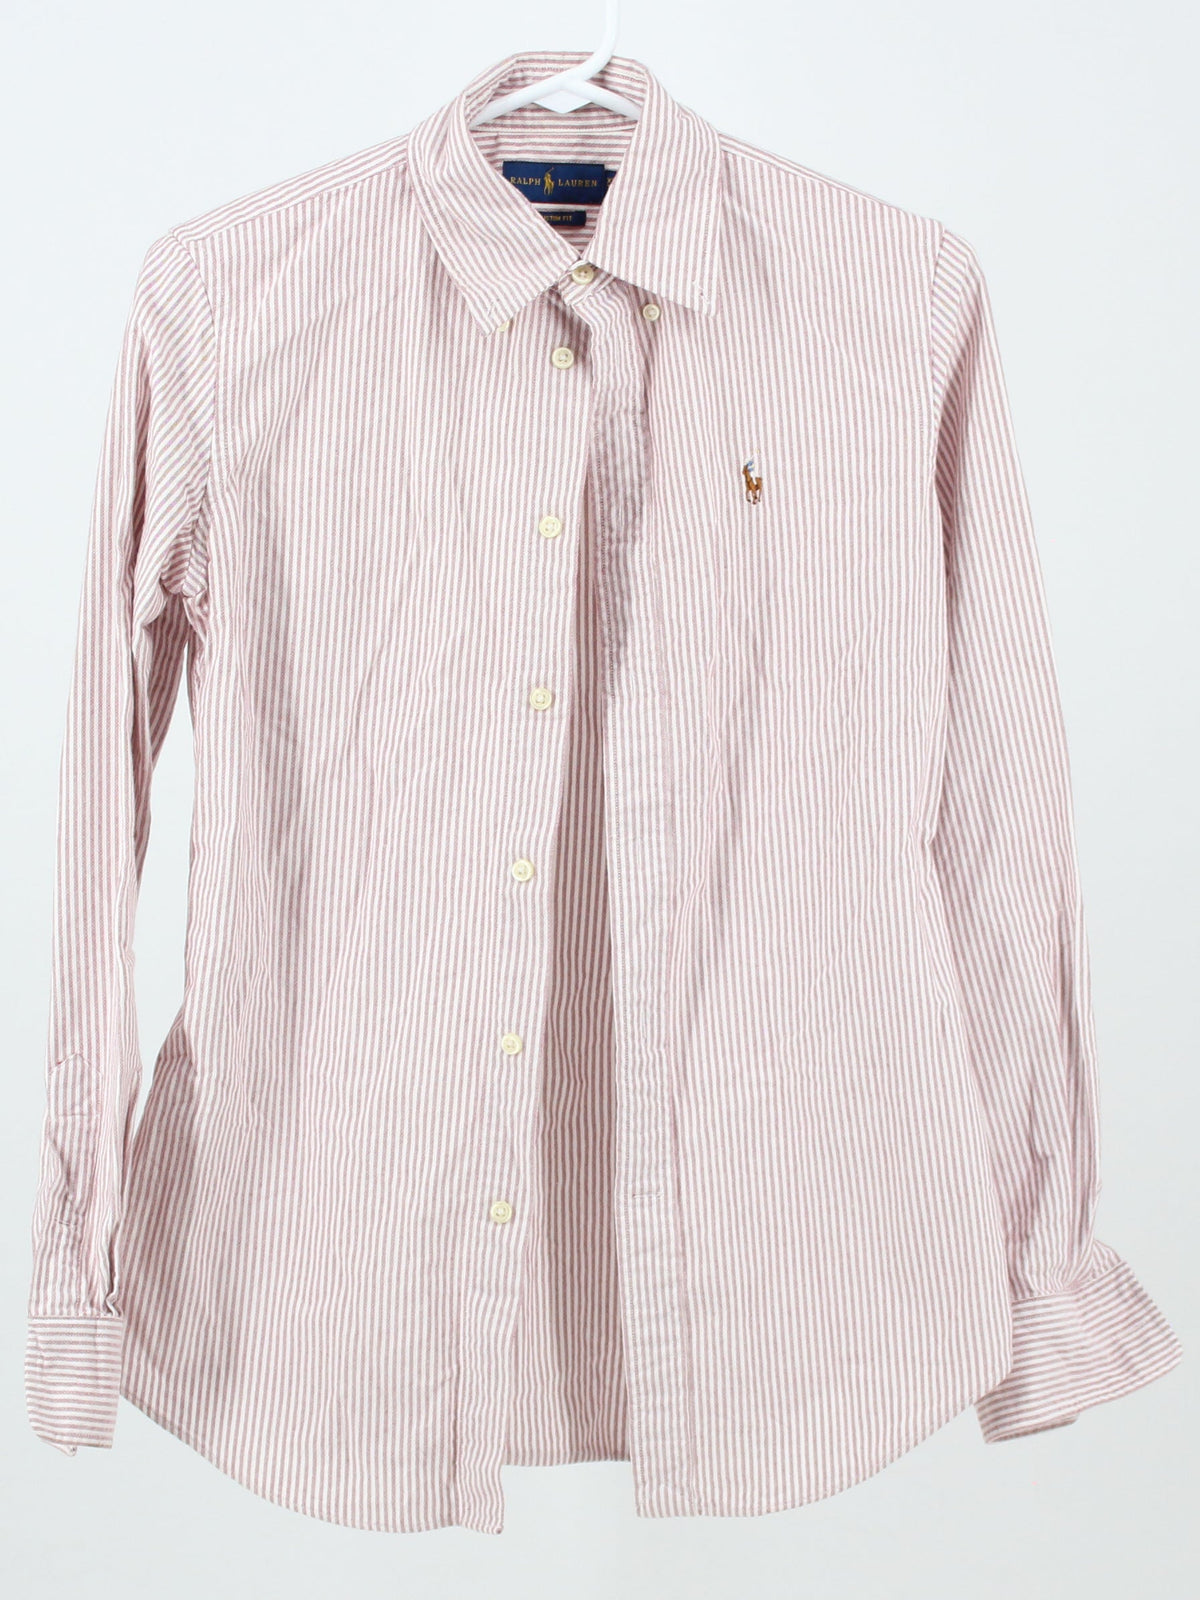 Ralph Lauren Pink and White Striped Button Up Shirt